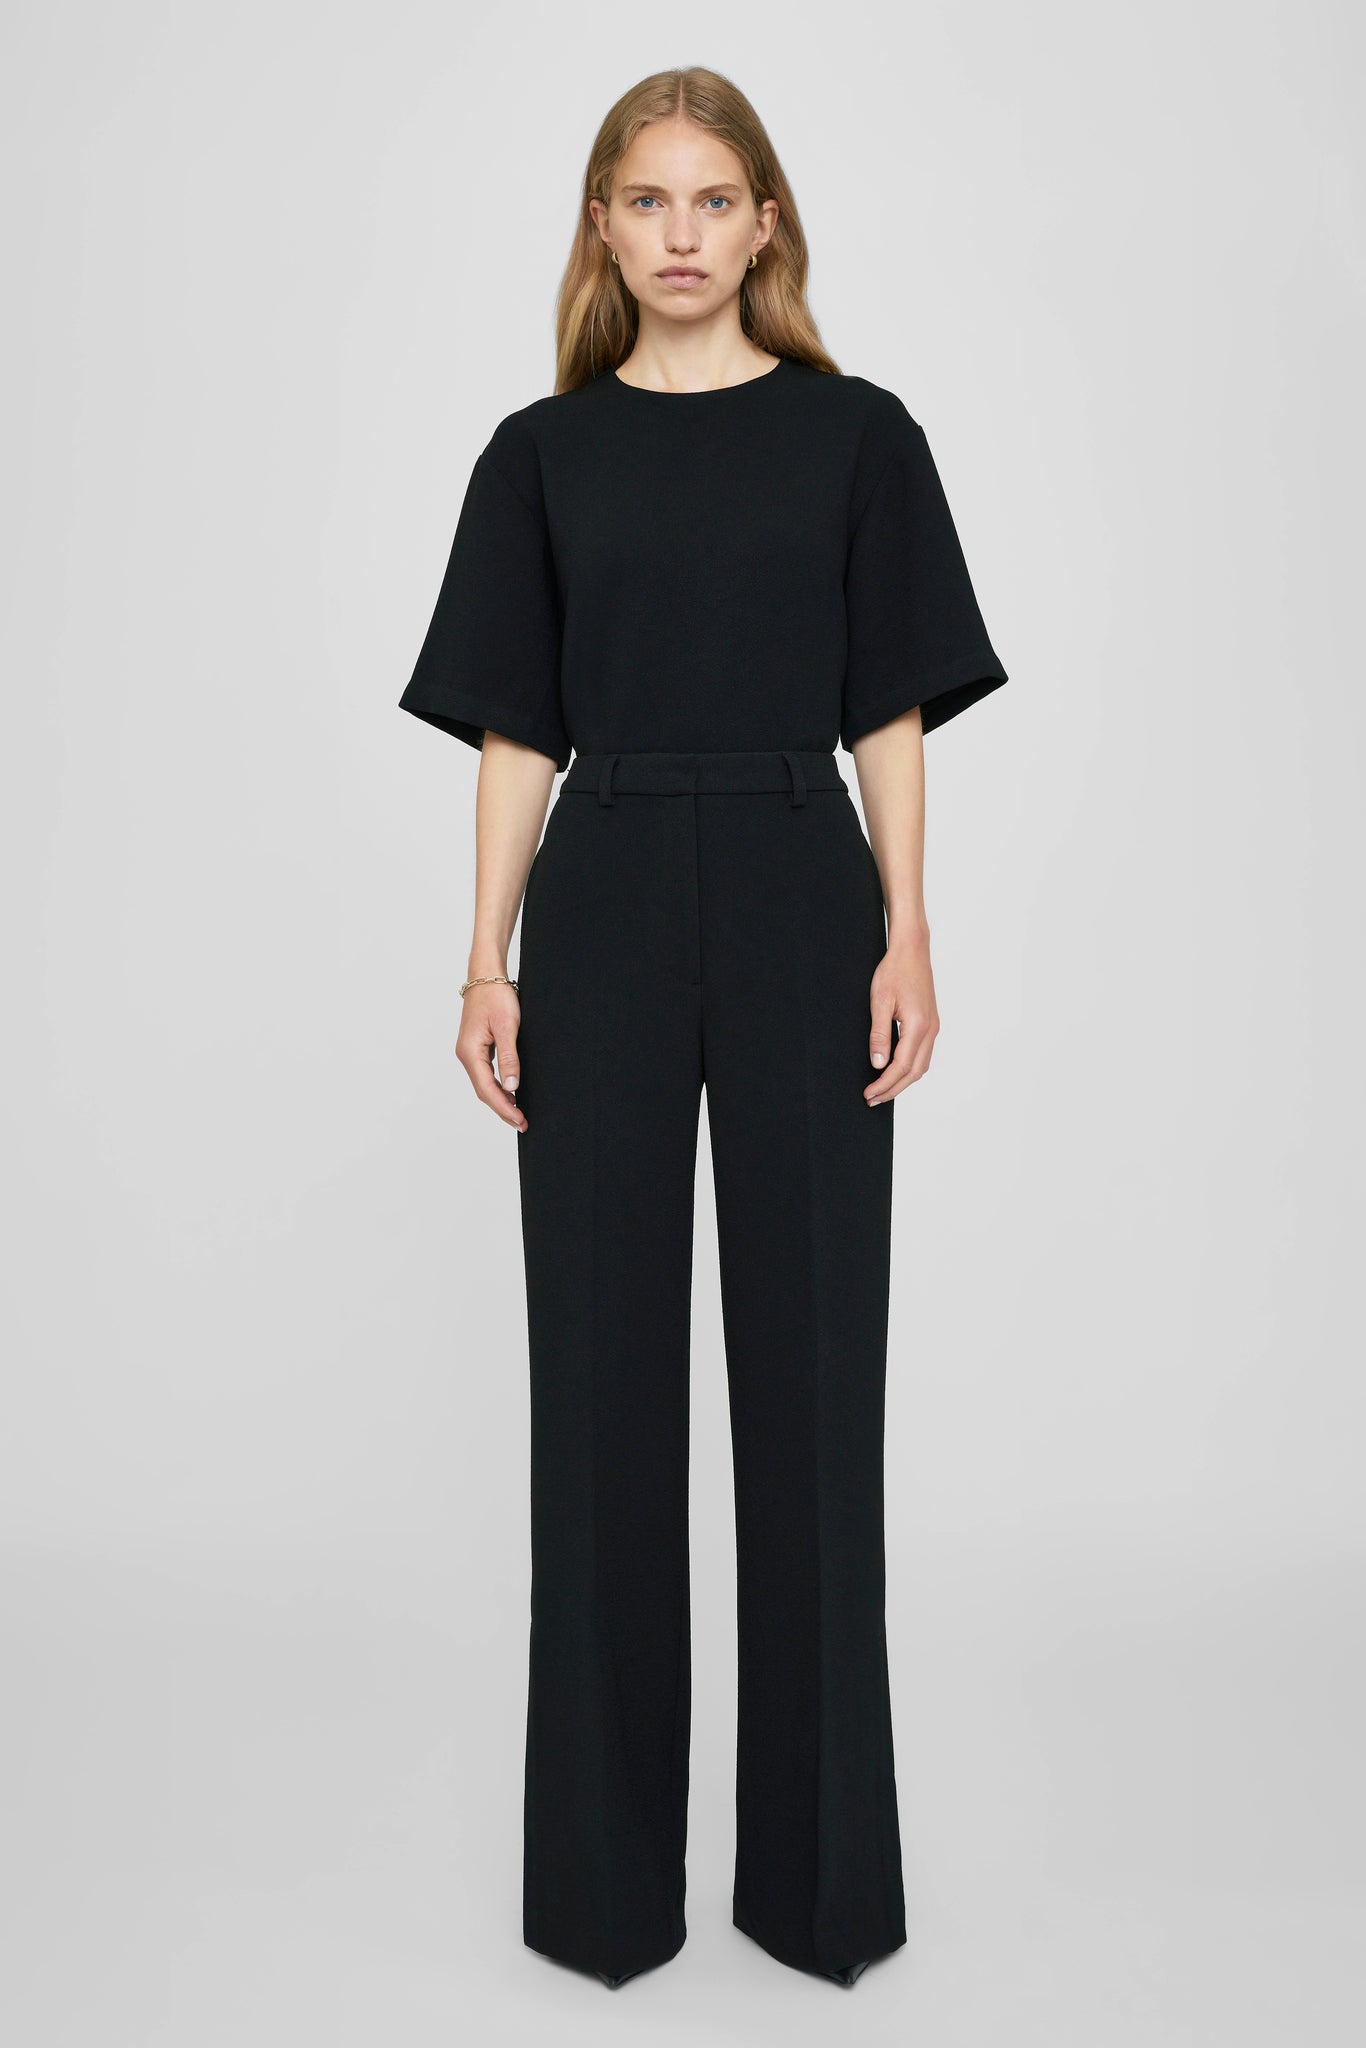 Anine Bing Lyra Trouser in Black available at TNT The New Trend Australia.